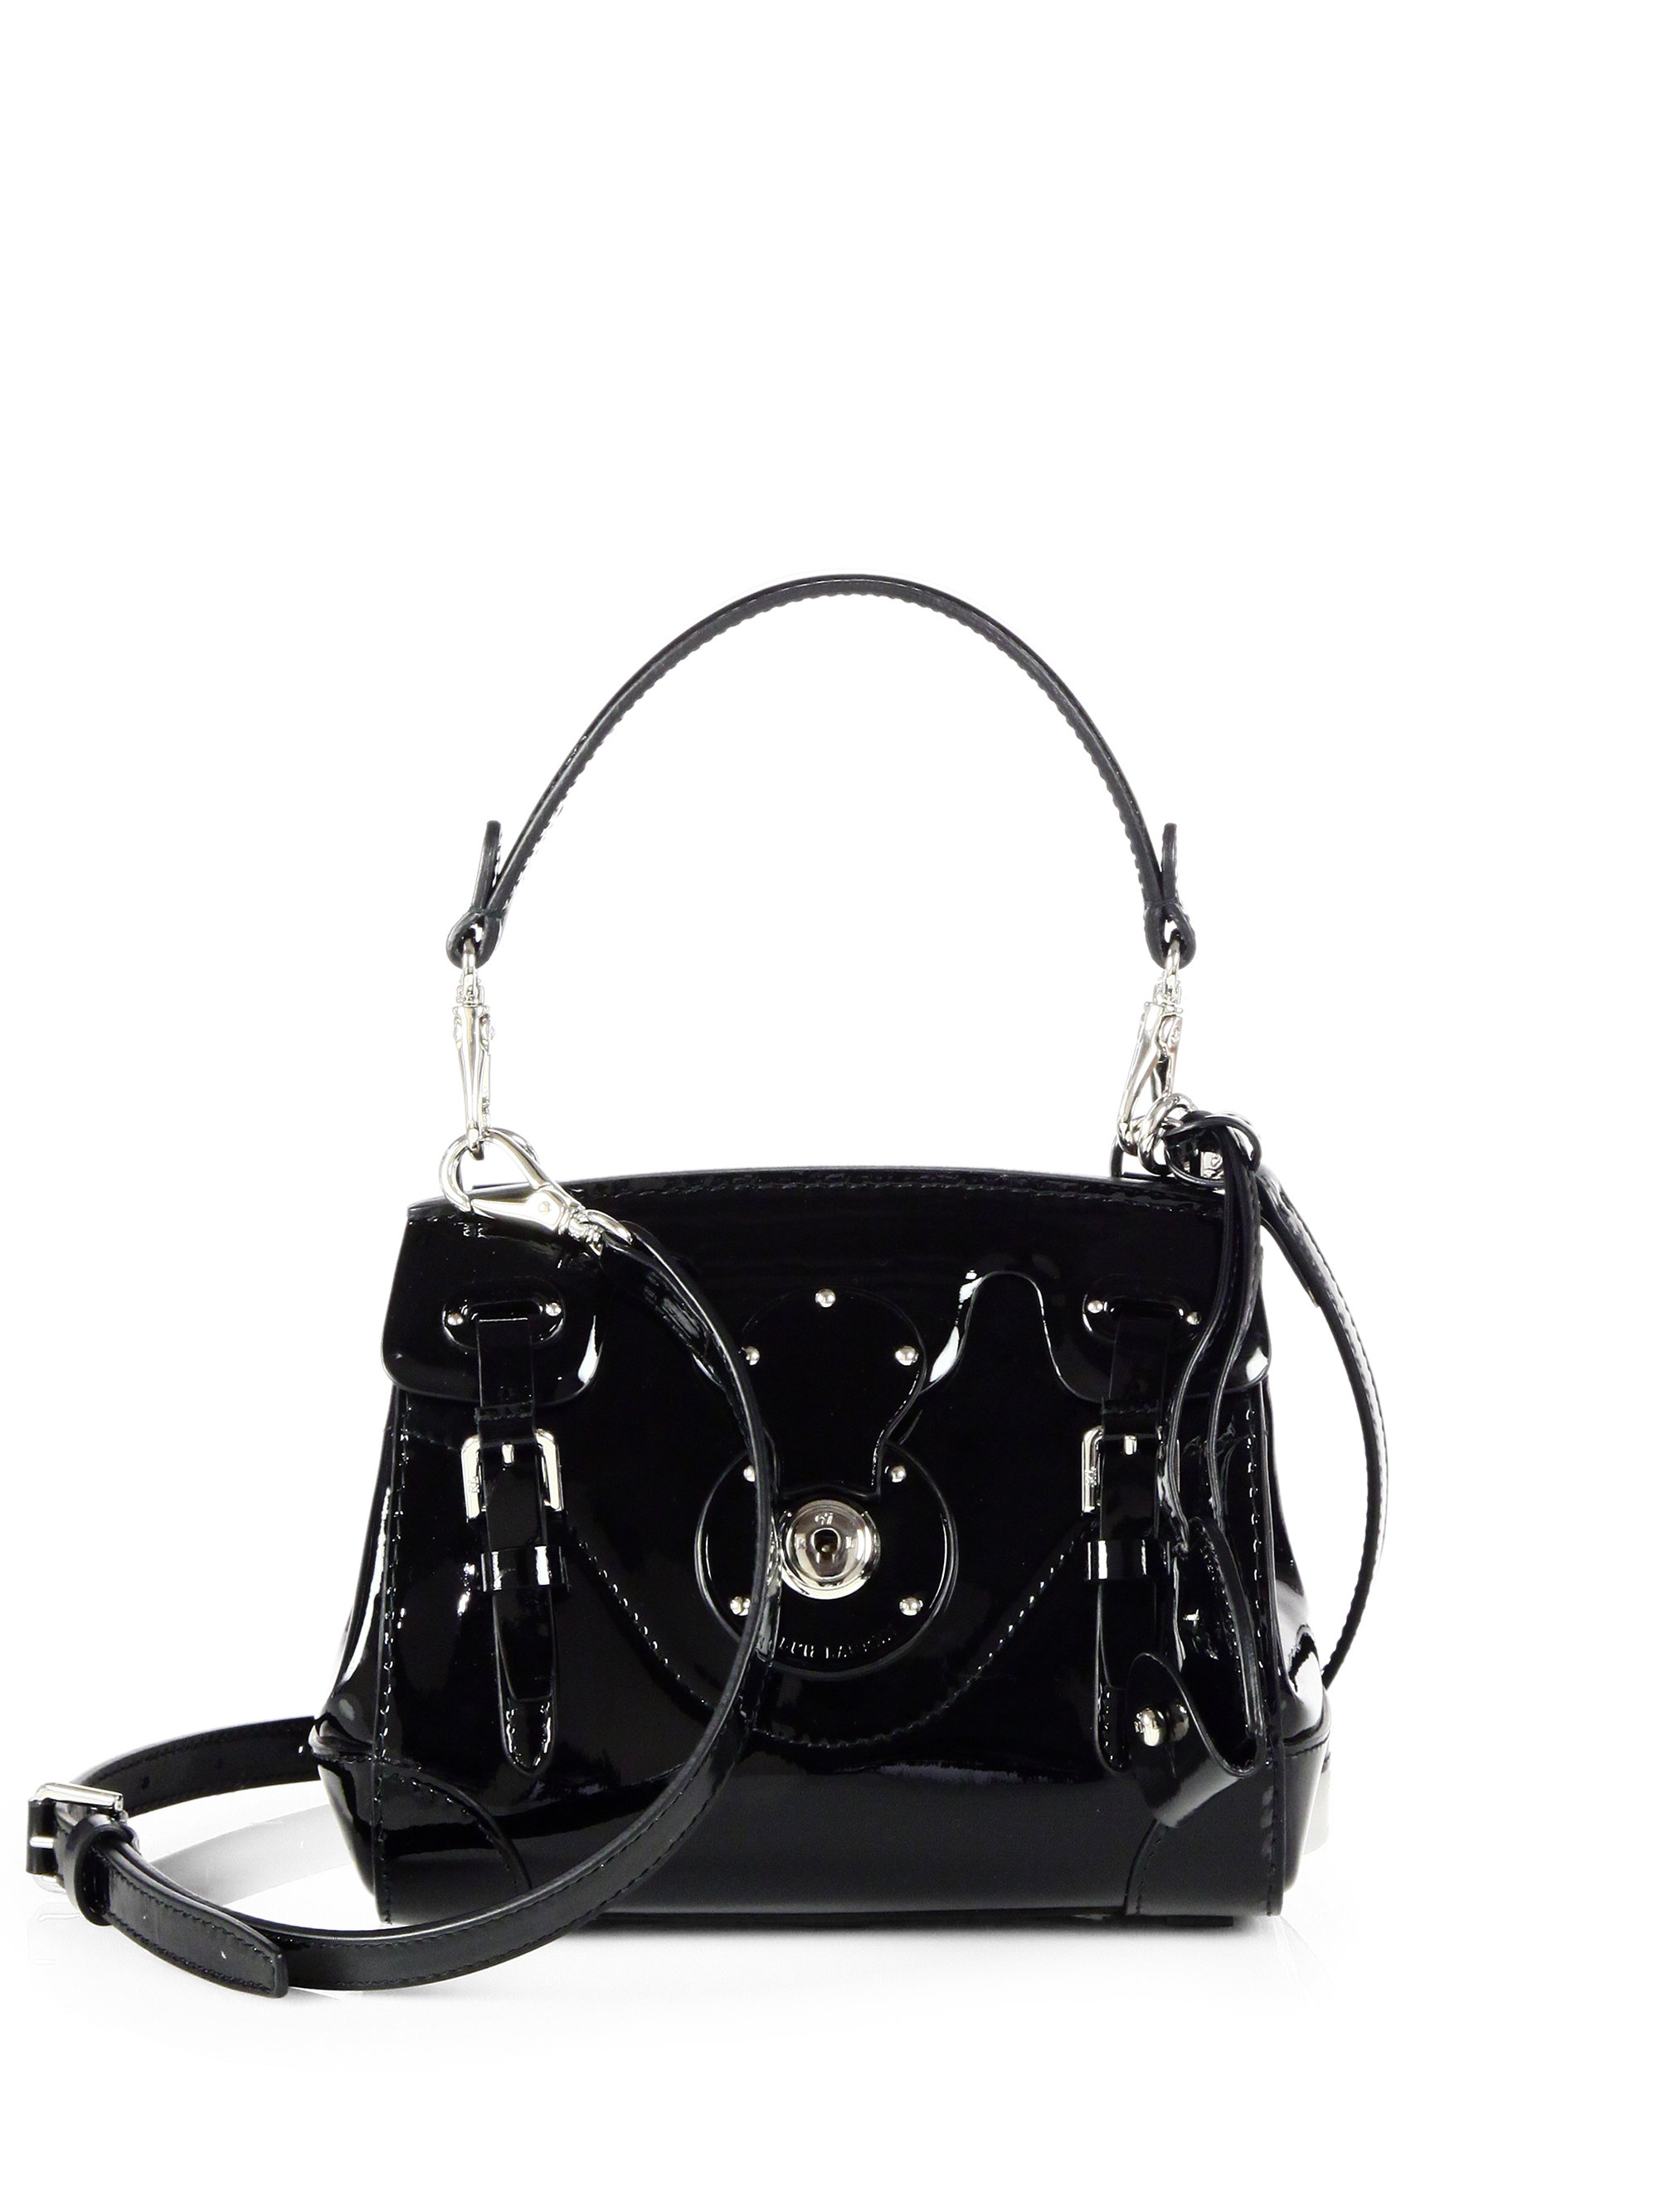 Ralph lauren collection Ricky Patent Leather Satchel in Black | Lyst